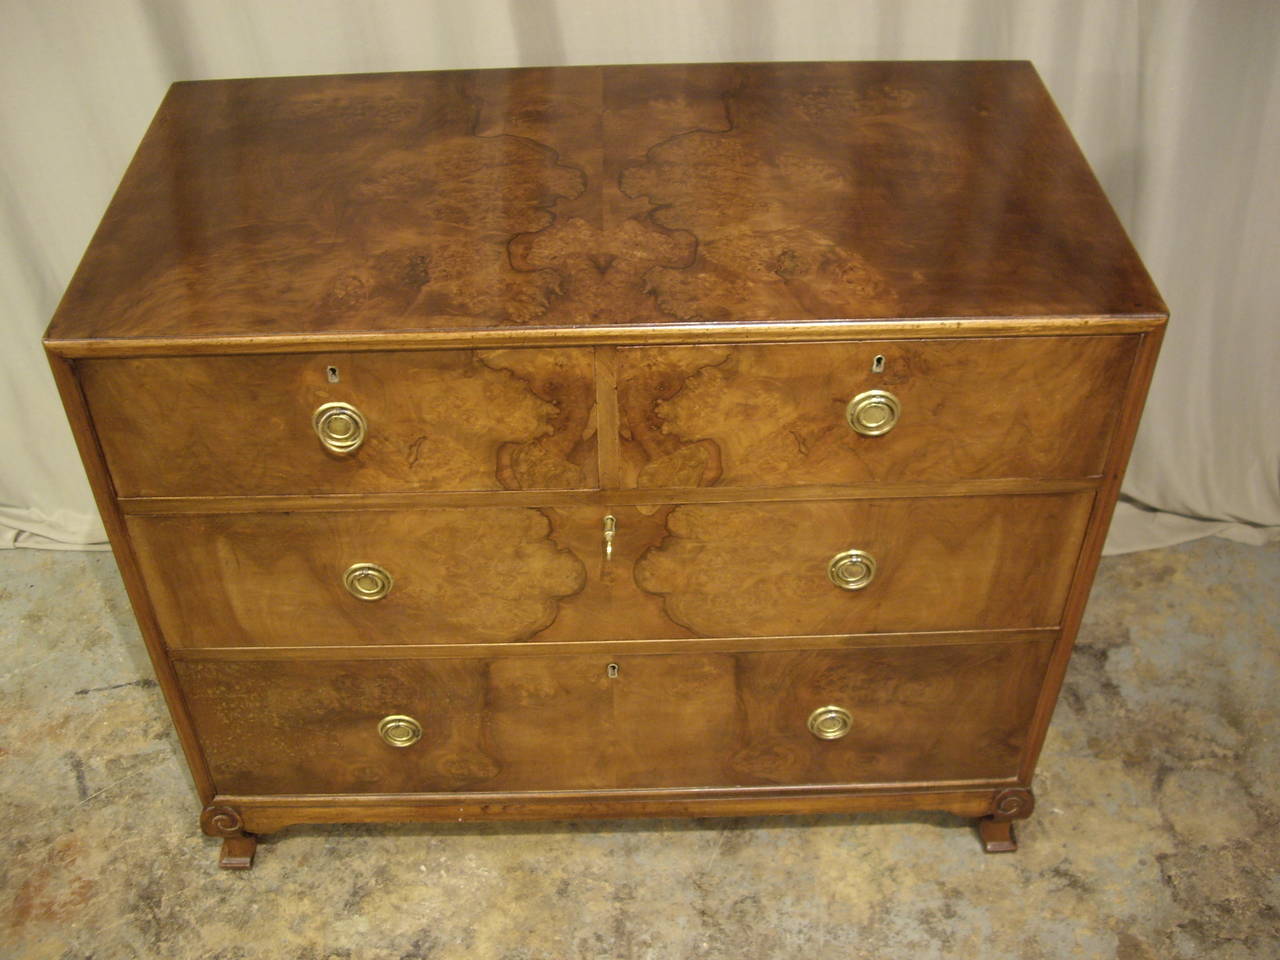 Beautiful bookmark veneered 1920s high quality Italian four-drawer commode. Almost looks like a urn on pedestal design in the grain of the veneer. Perfect size for bedside commode or next to a sofa.